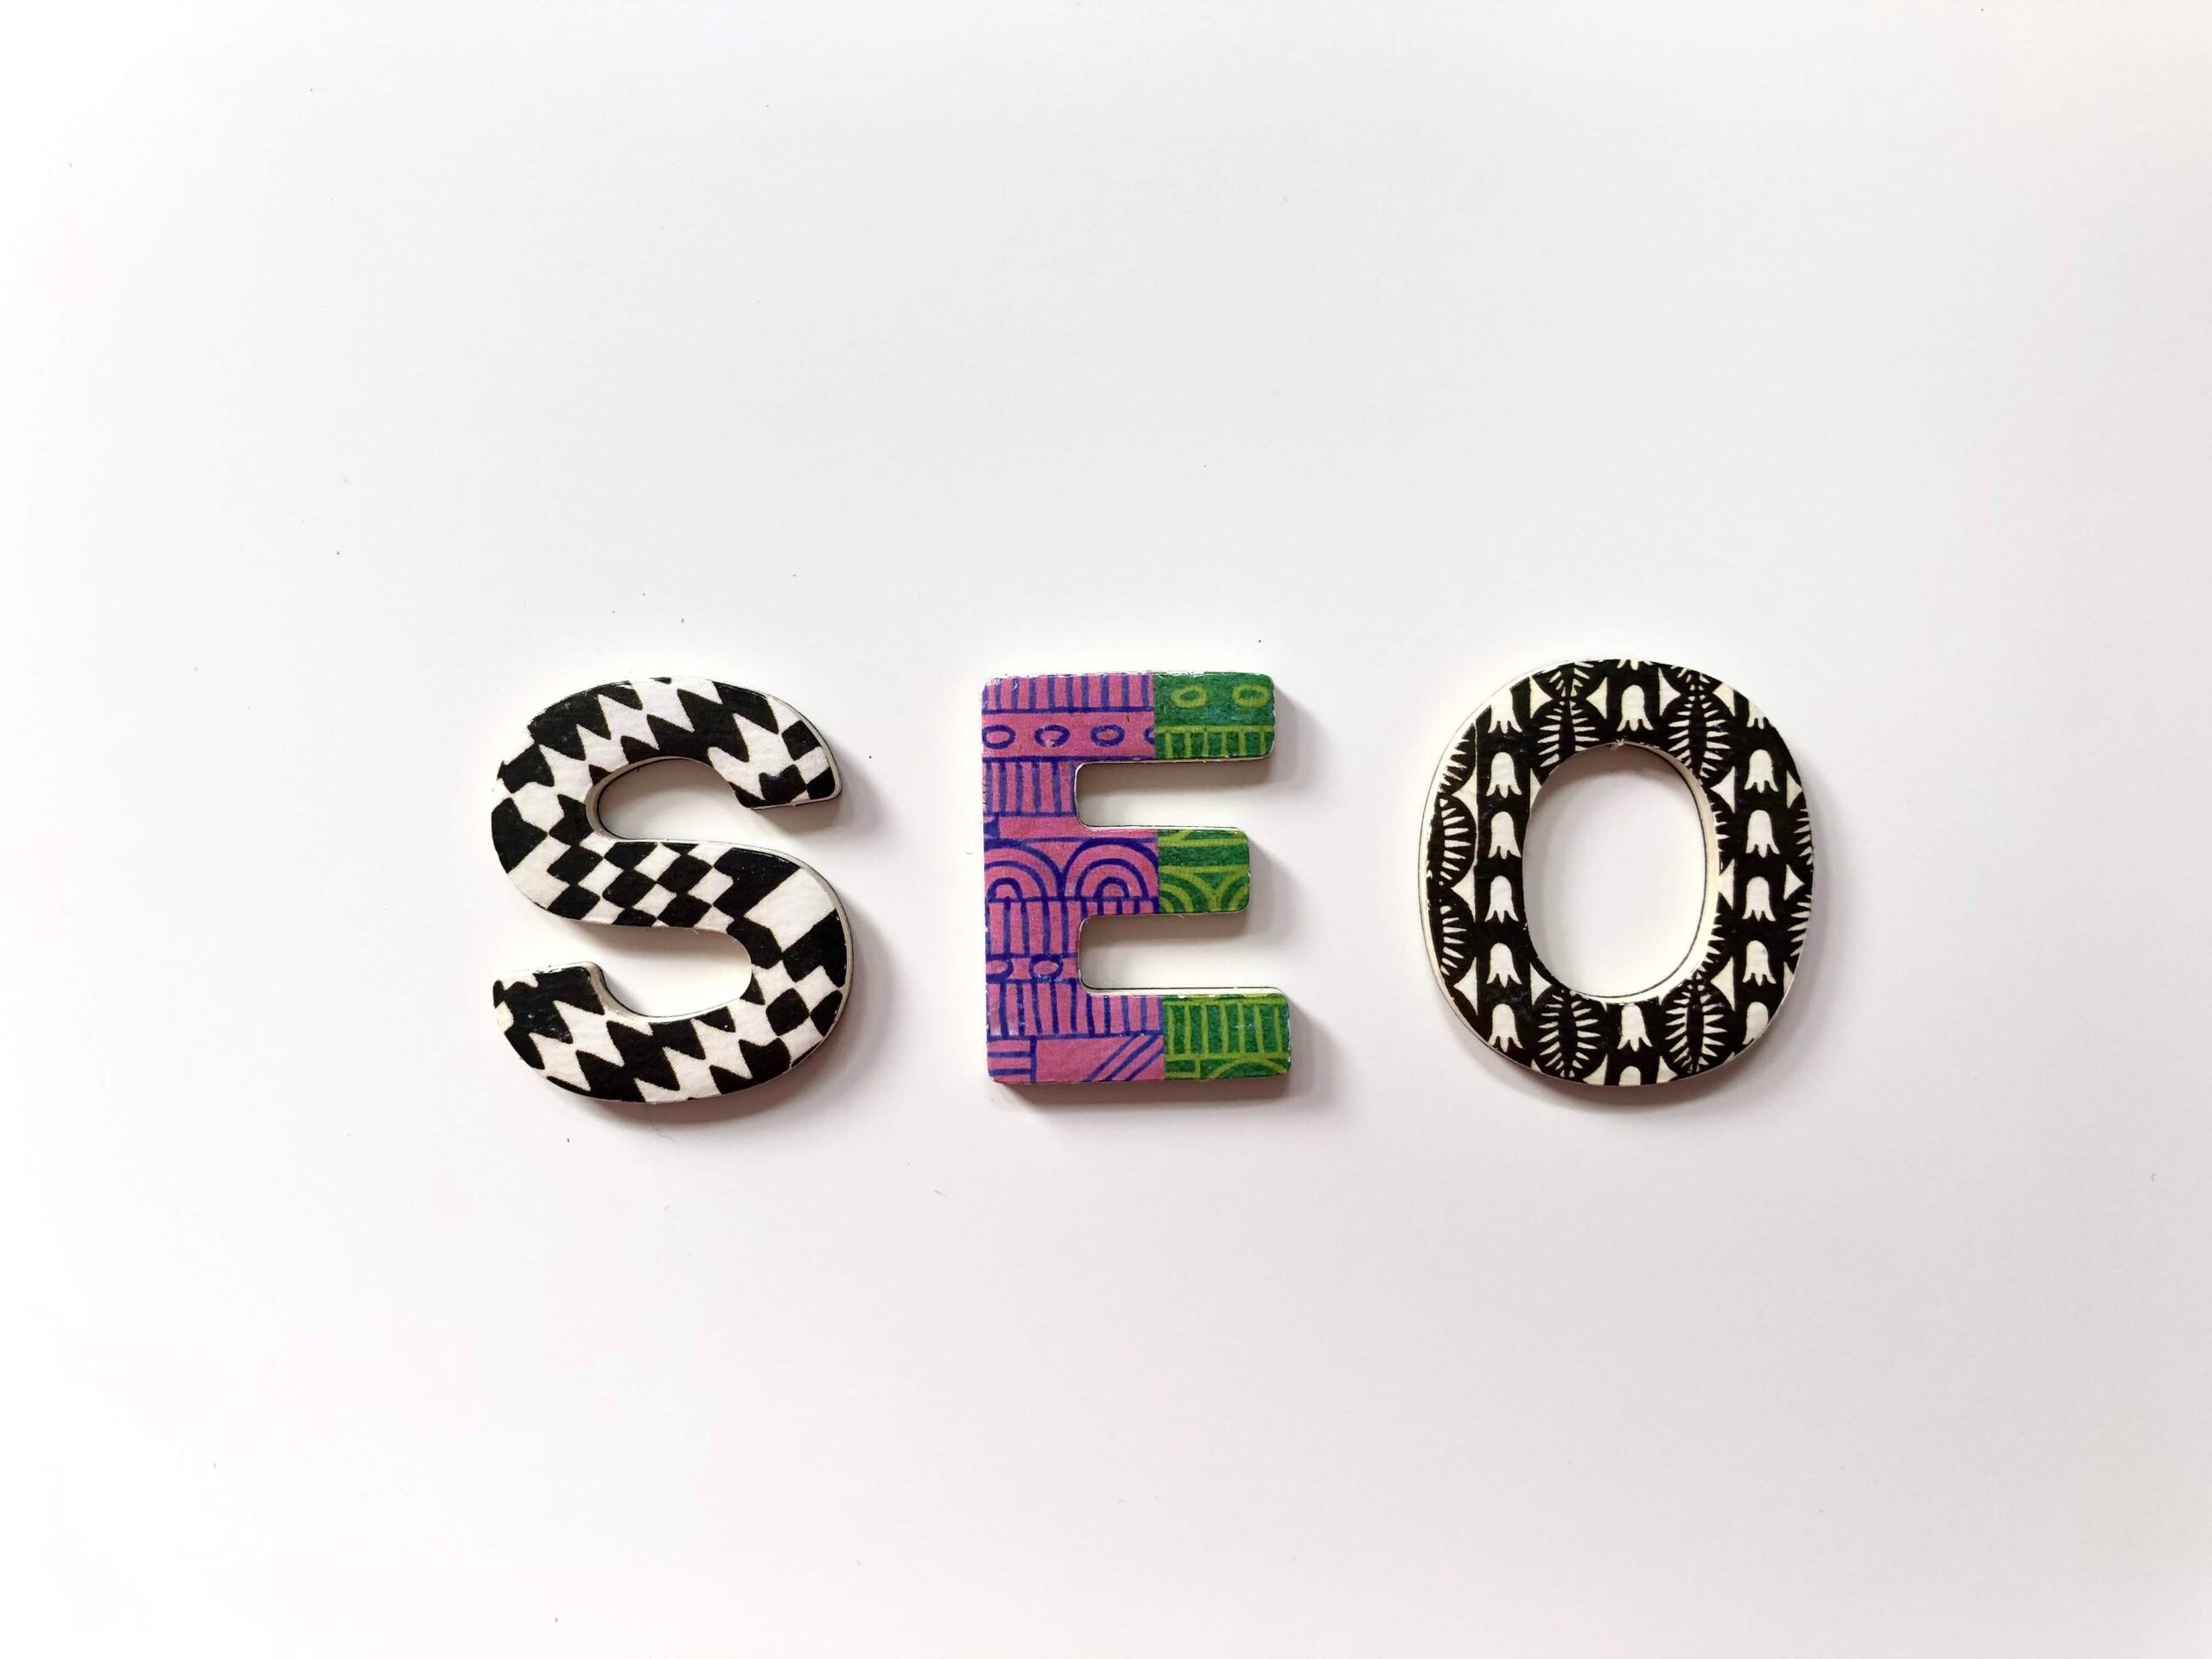 How to Use SEO for Business Growth?